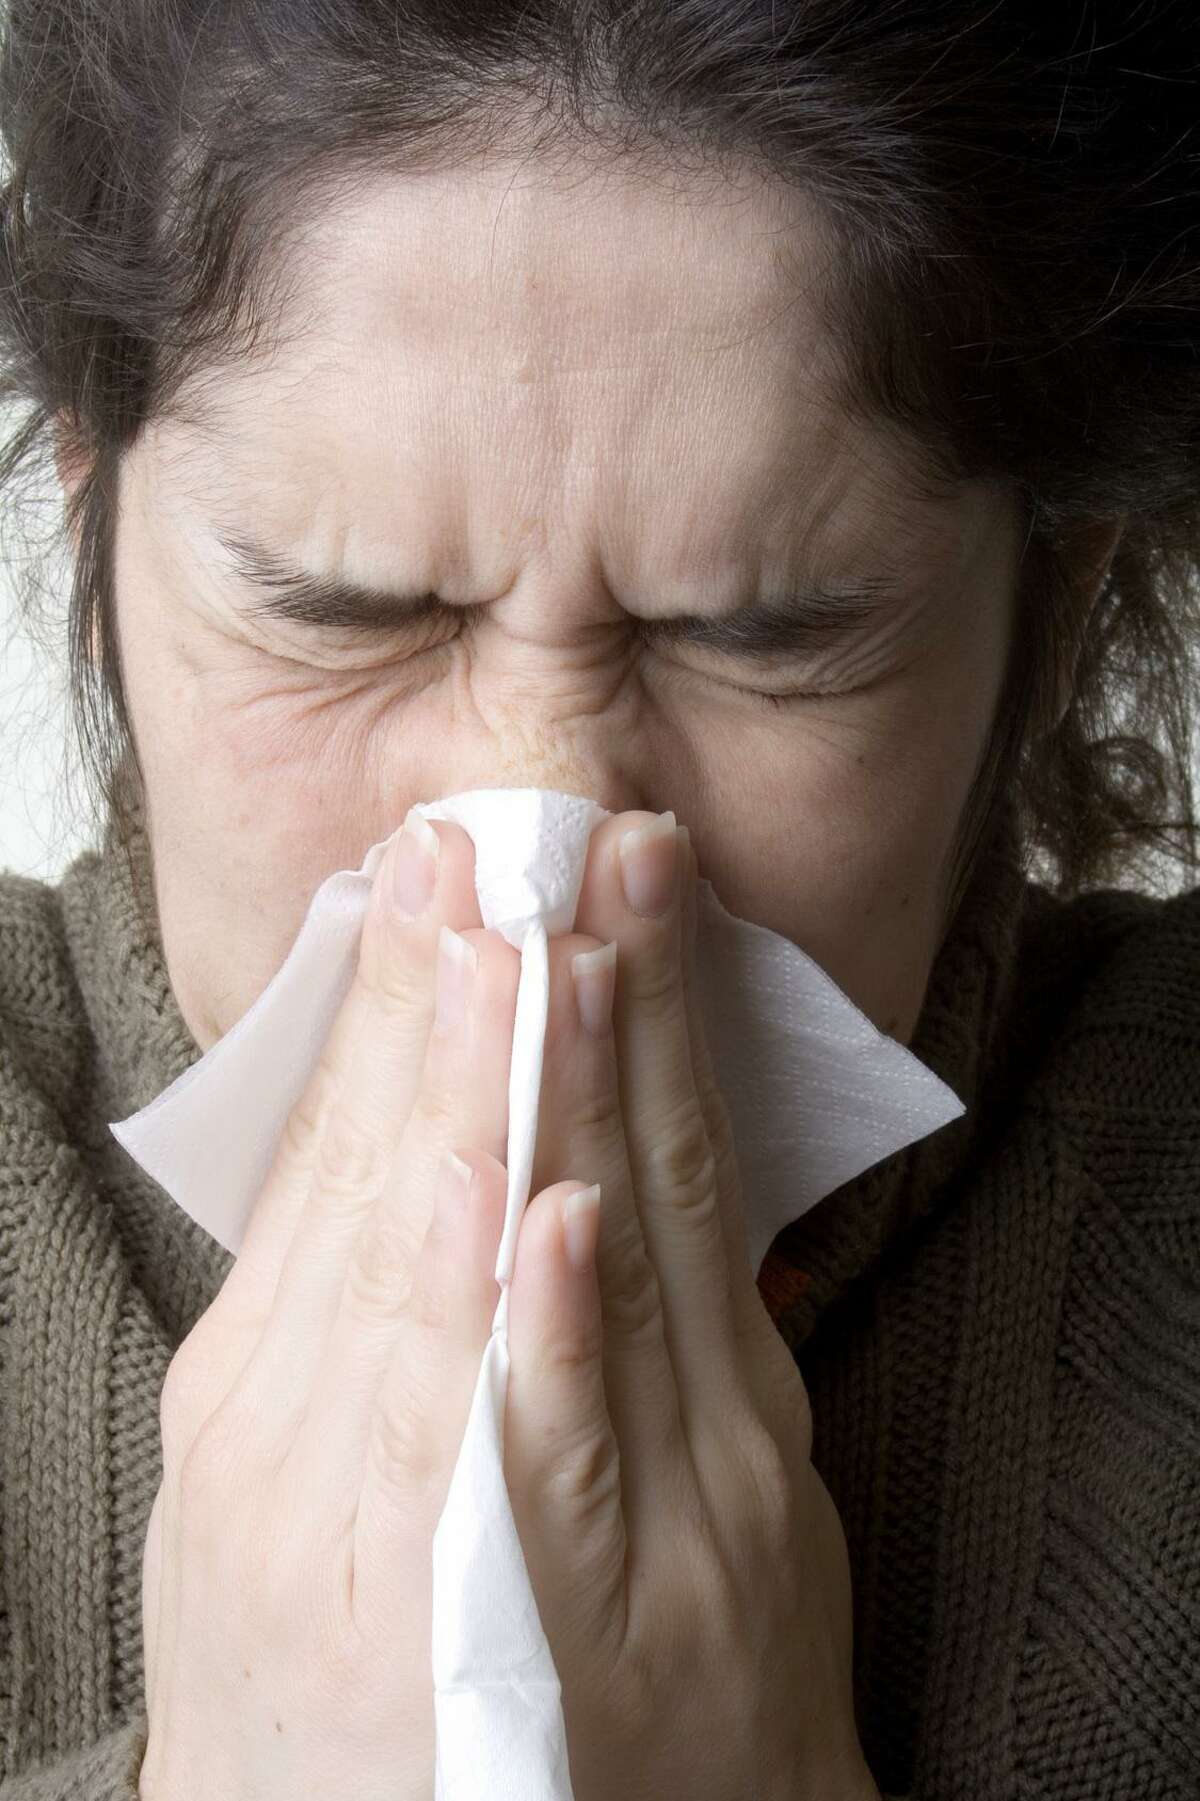 Airplanes have HEPA filters, but do they protect for sneezing seatmates?